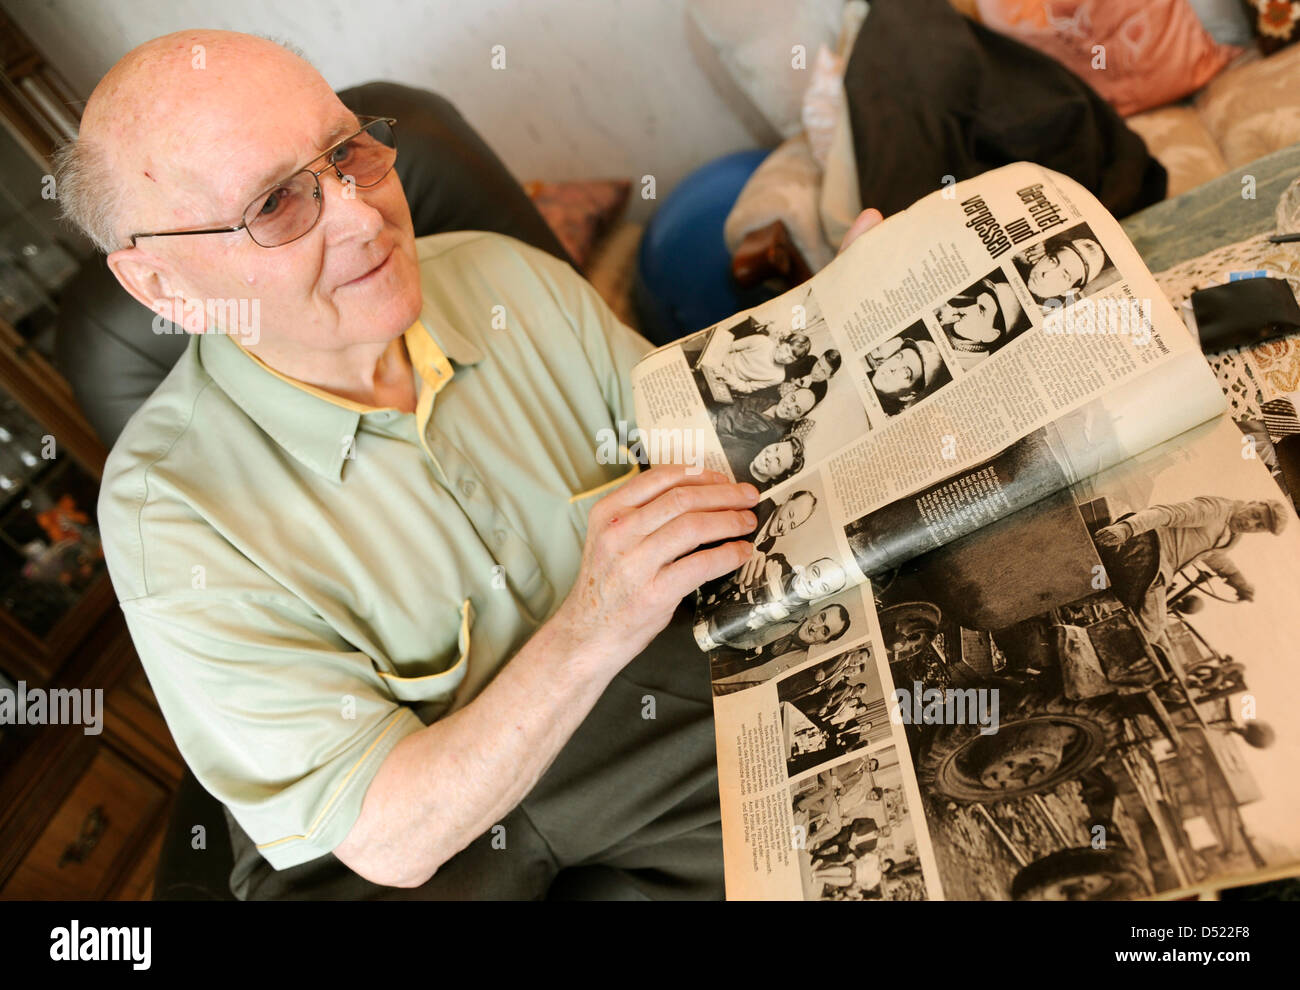 Siegfried Ebeling, a survivor of the mining drama of Lengede, examines historic newspaper articles in his apartment in Bodenstedt near Lengede, Germany, 12 October 2010. The 79 year-old was one of eleven miners that were trapped in an abandoned shaft for 14 days, before they were rescued on 3 November 1963. The rescue operation became widely know as the 'Miracle of Lengede'. Photo: Stock Photo